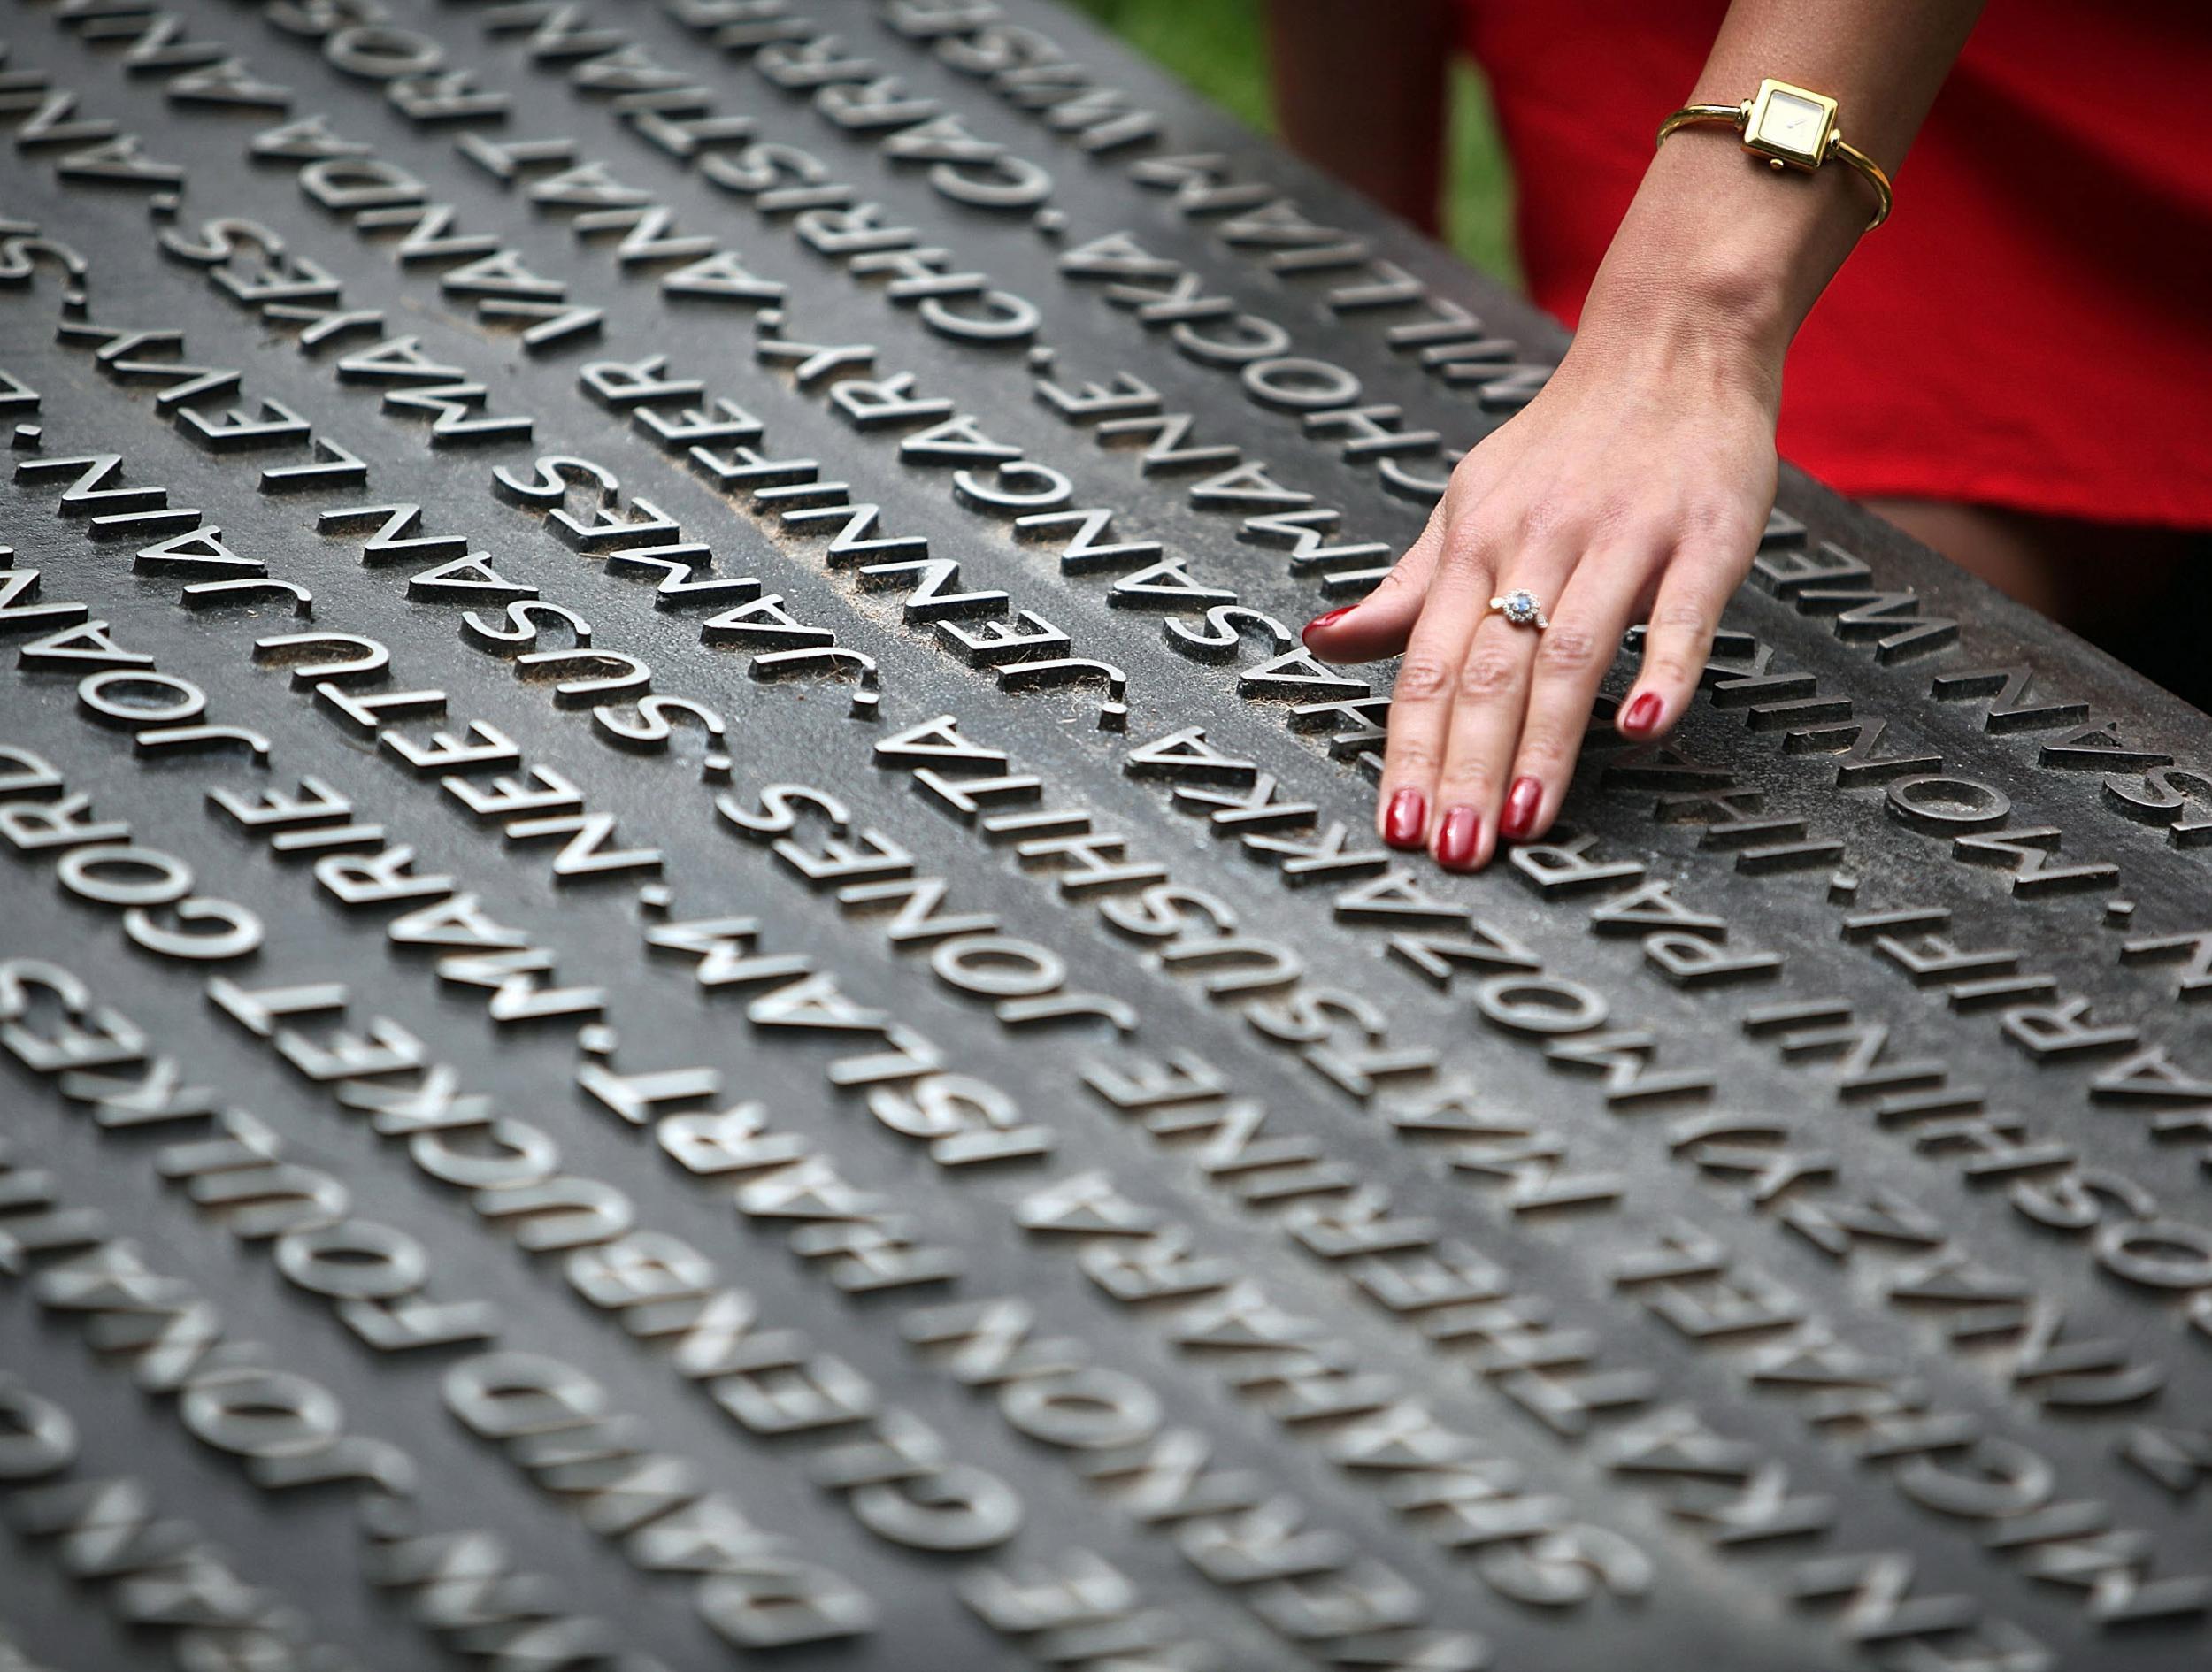 Saba Mozakka, whose mother was killed in the 7 July 2005 attacks, places her hand on the Hyde Park memorial plaque, which shows the names of all those who lost their lives